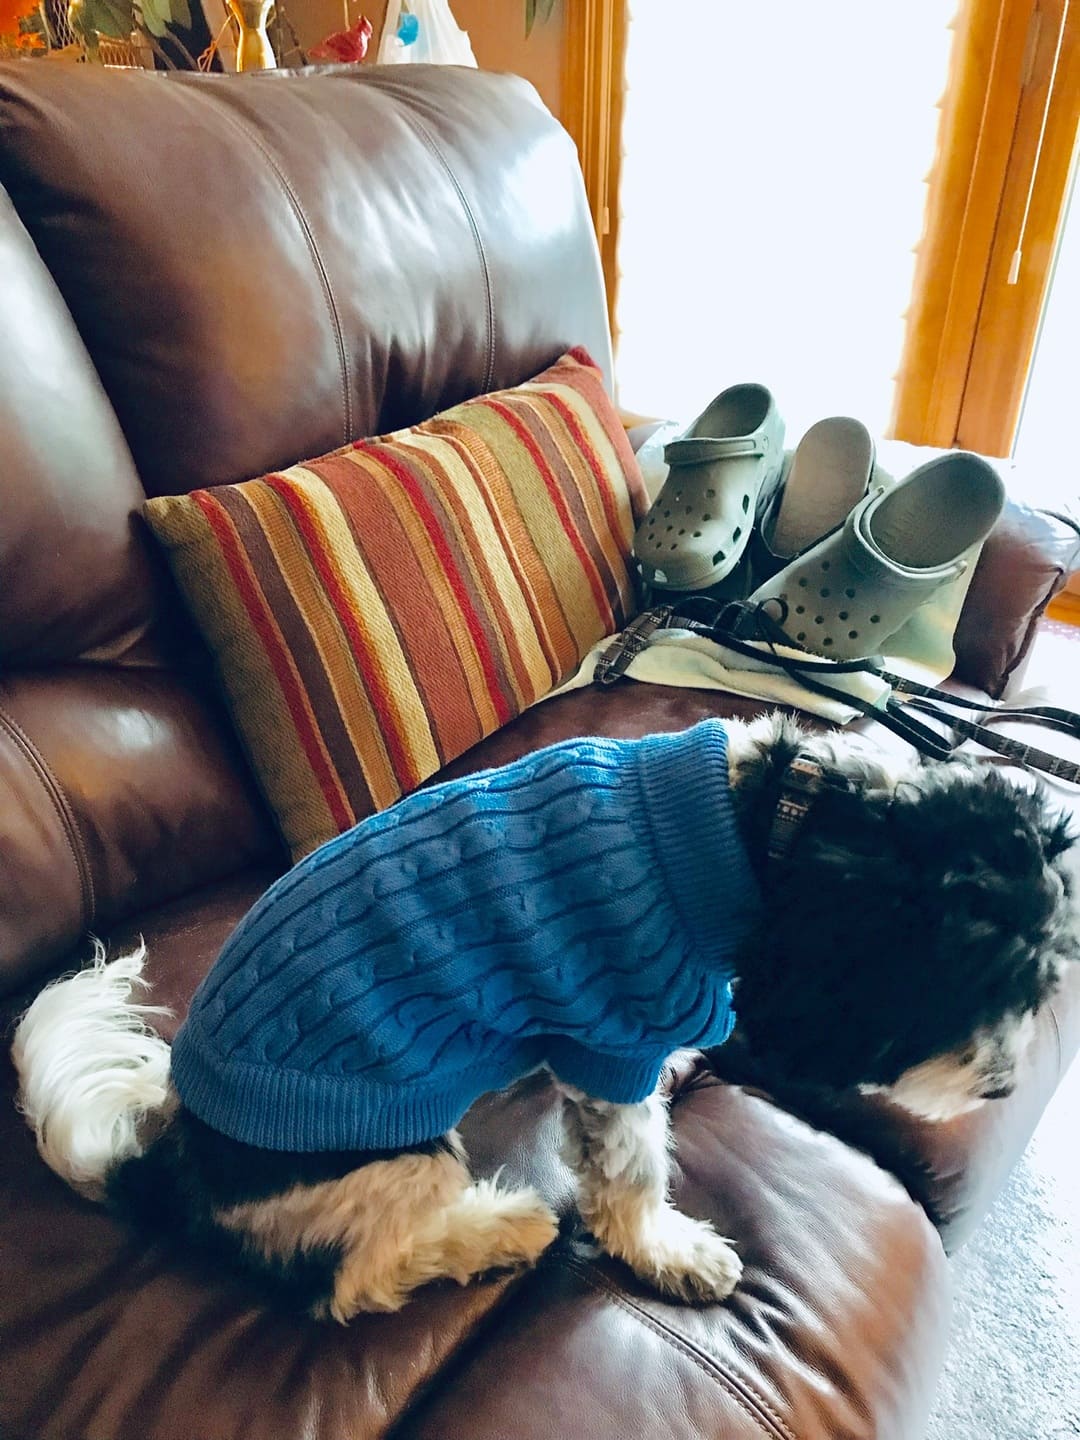 Riverside Blue Combed Cotton Cable Knit Dog Sweater